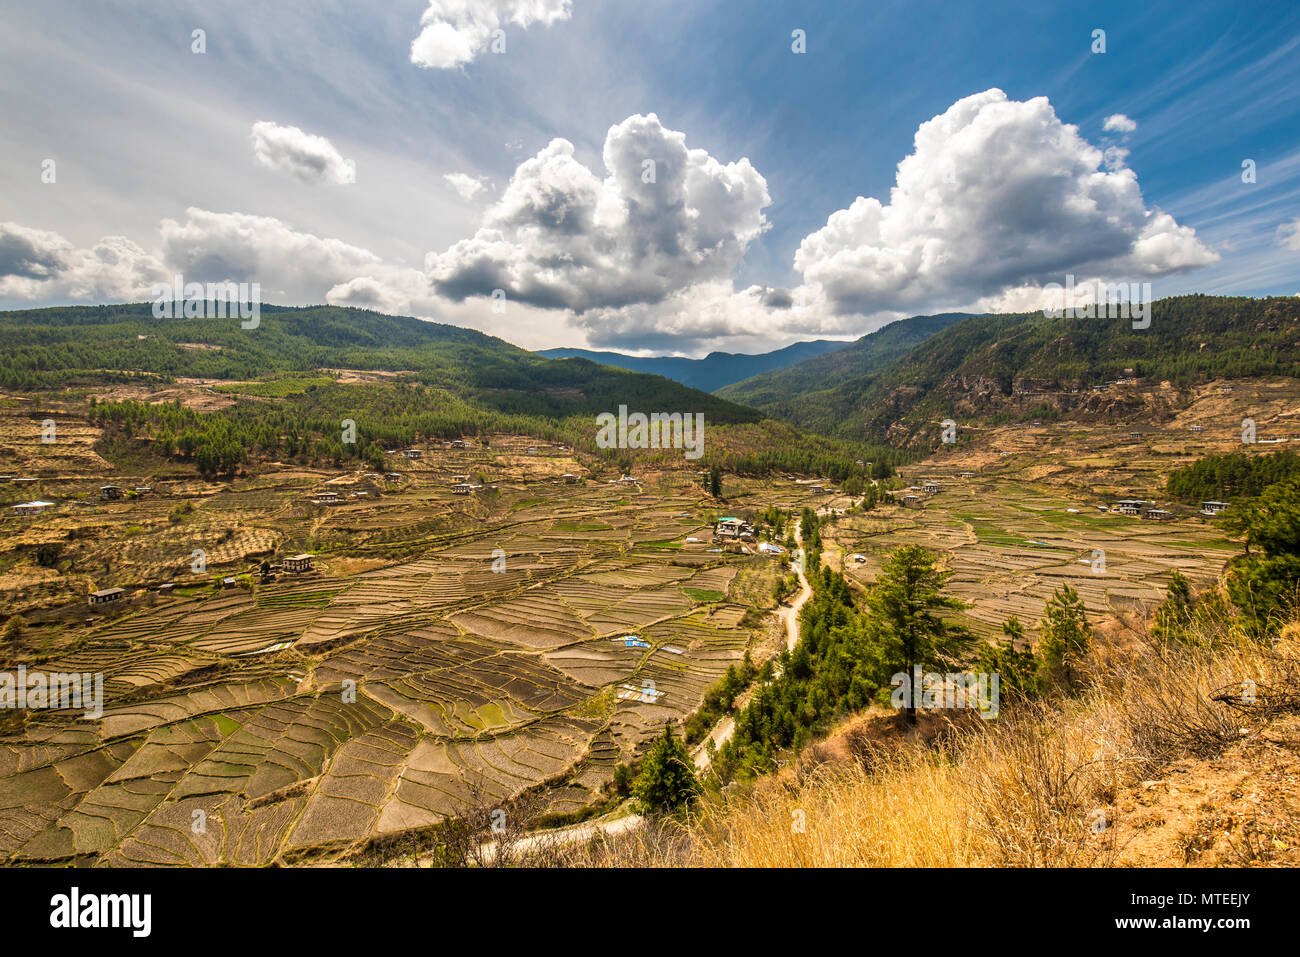 Terraced cultivation, landscape with rice fields, cloudy atmosphere, Paro district, Himalayan region, Kingdom of Bhutan Stock Photo